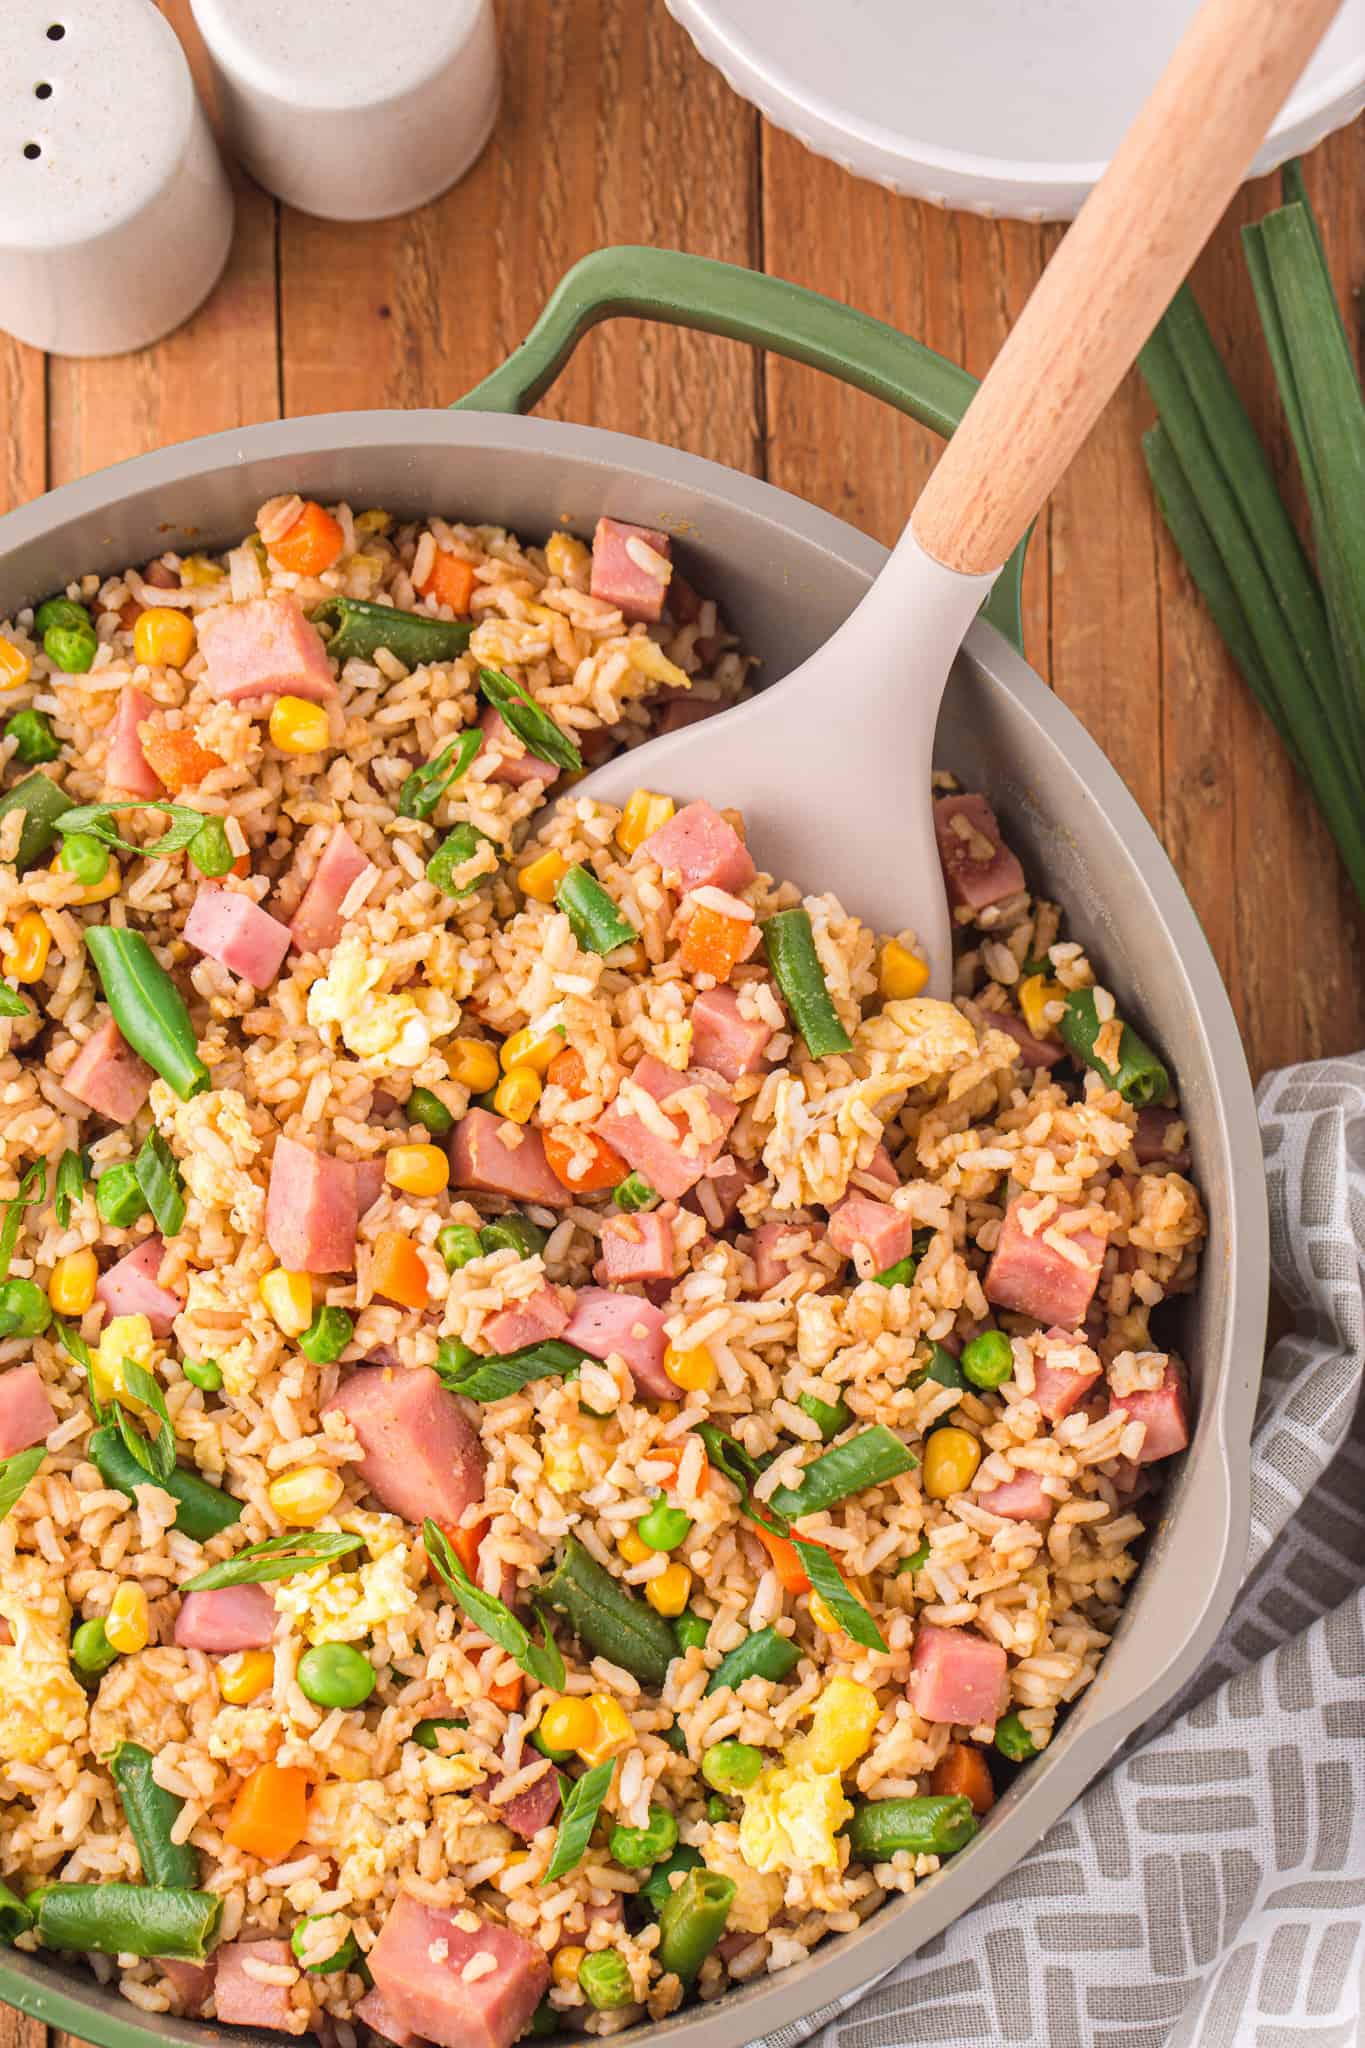 Ham Fried Rice is a delicious dinner or side dish recipe using diced ham, scrambled eggs and frozen mixed veggies all tossed with rice, soy sauce and fried rice seasoning mix.